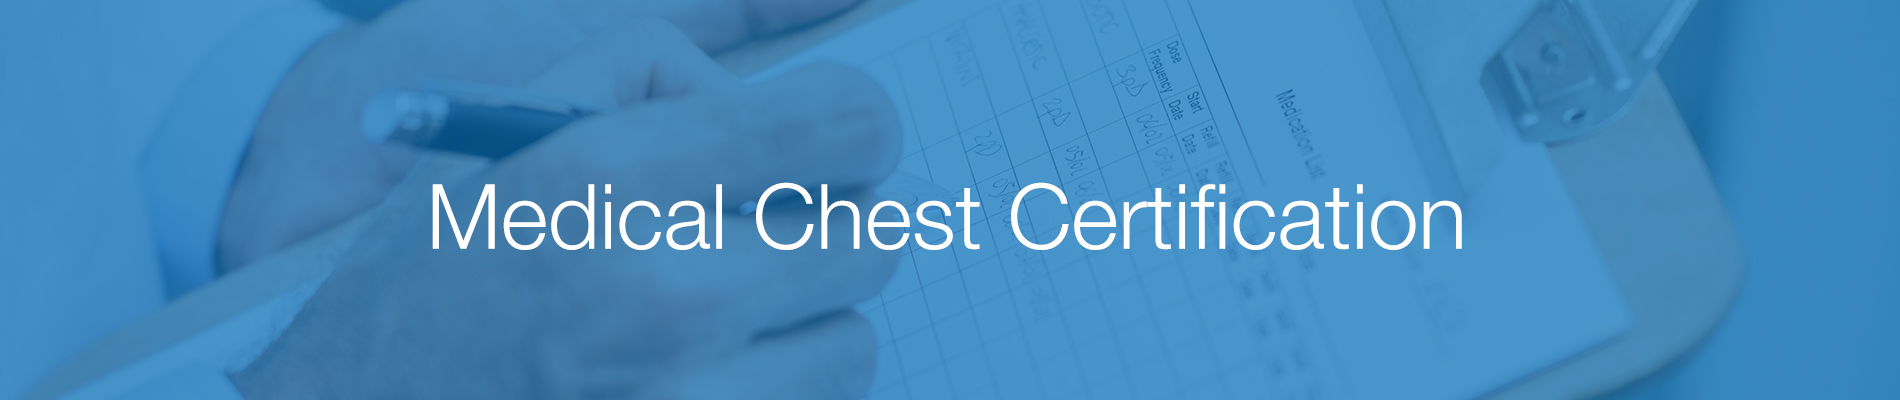 Medical Chest Certification